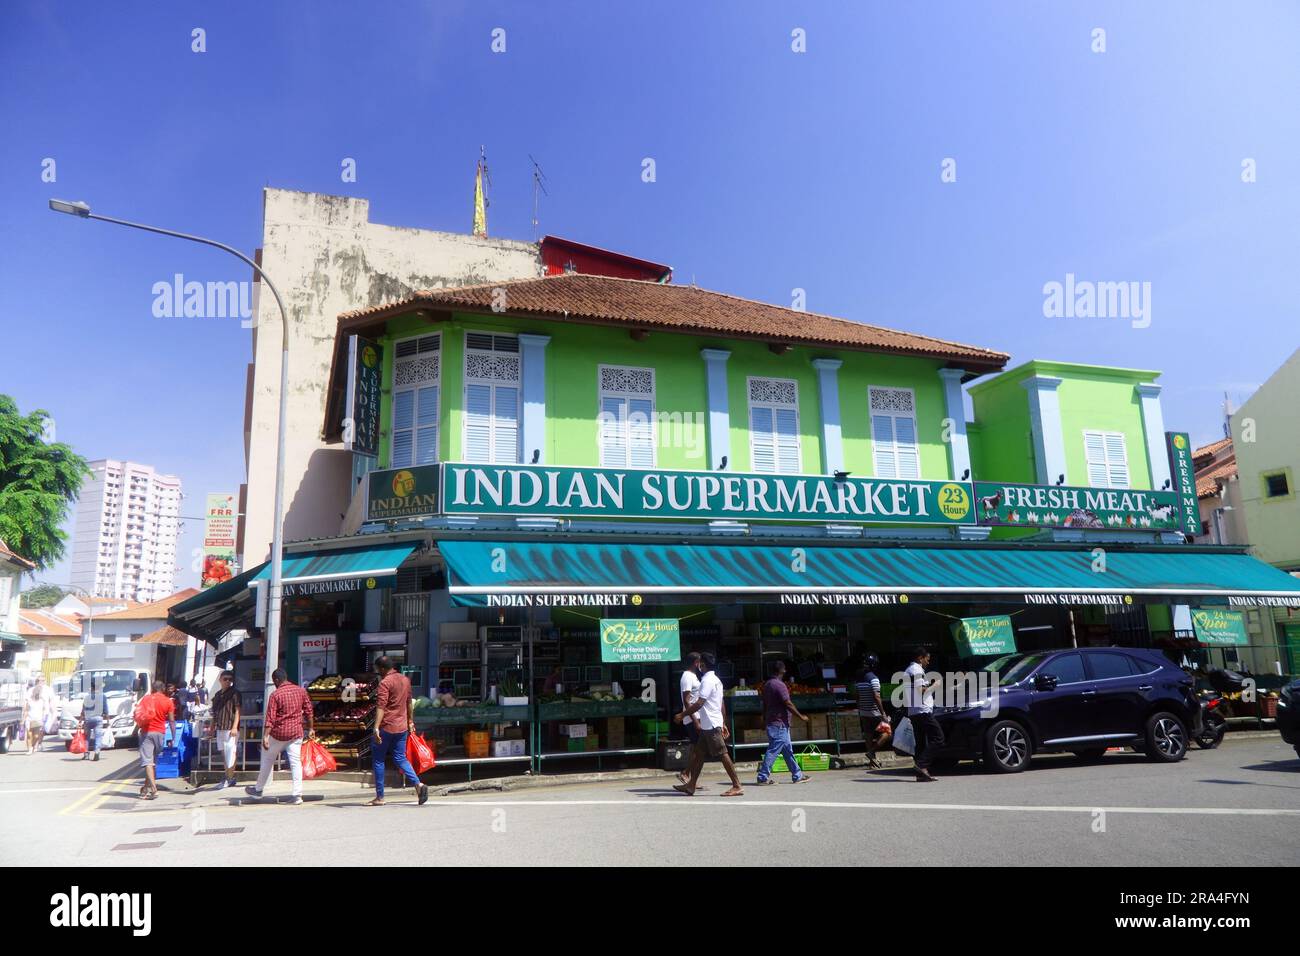 Indian Supermarket with fresh meat, Little India, Singapore. No MR or PR Stock Photo